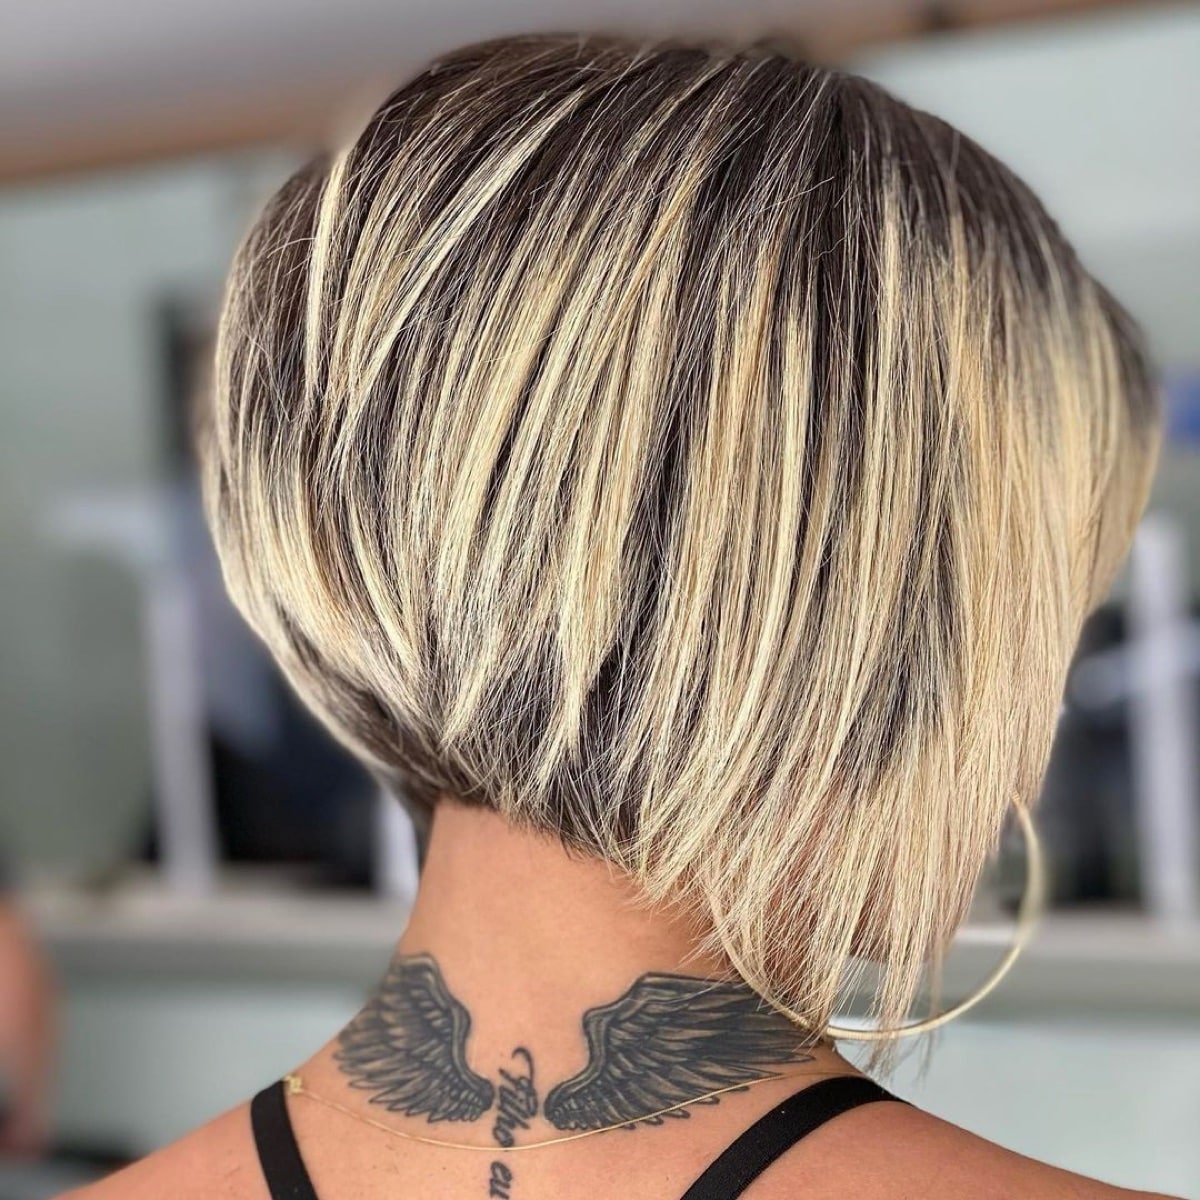 The Best Inverted Bob Hairstyles For A Short And Medium Hair - ViewKick